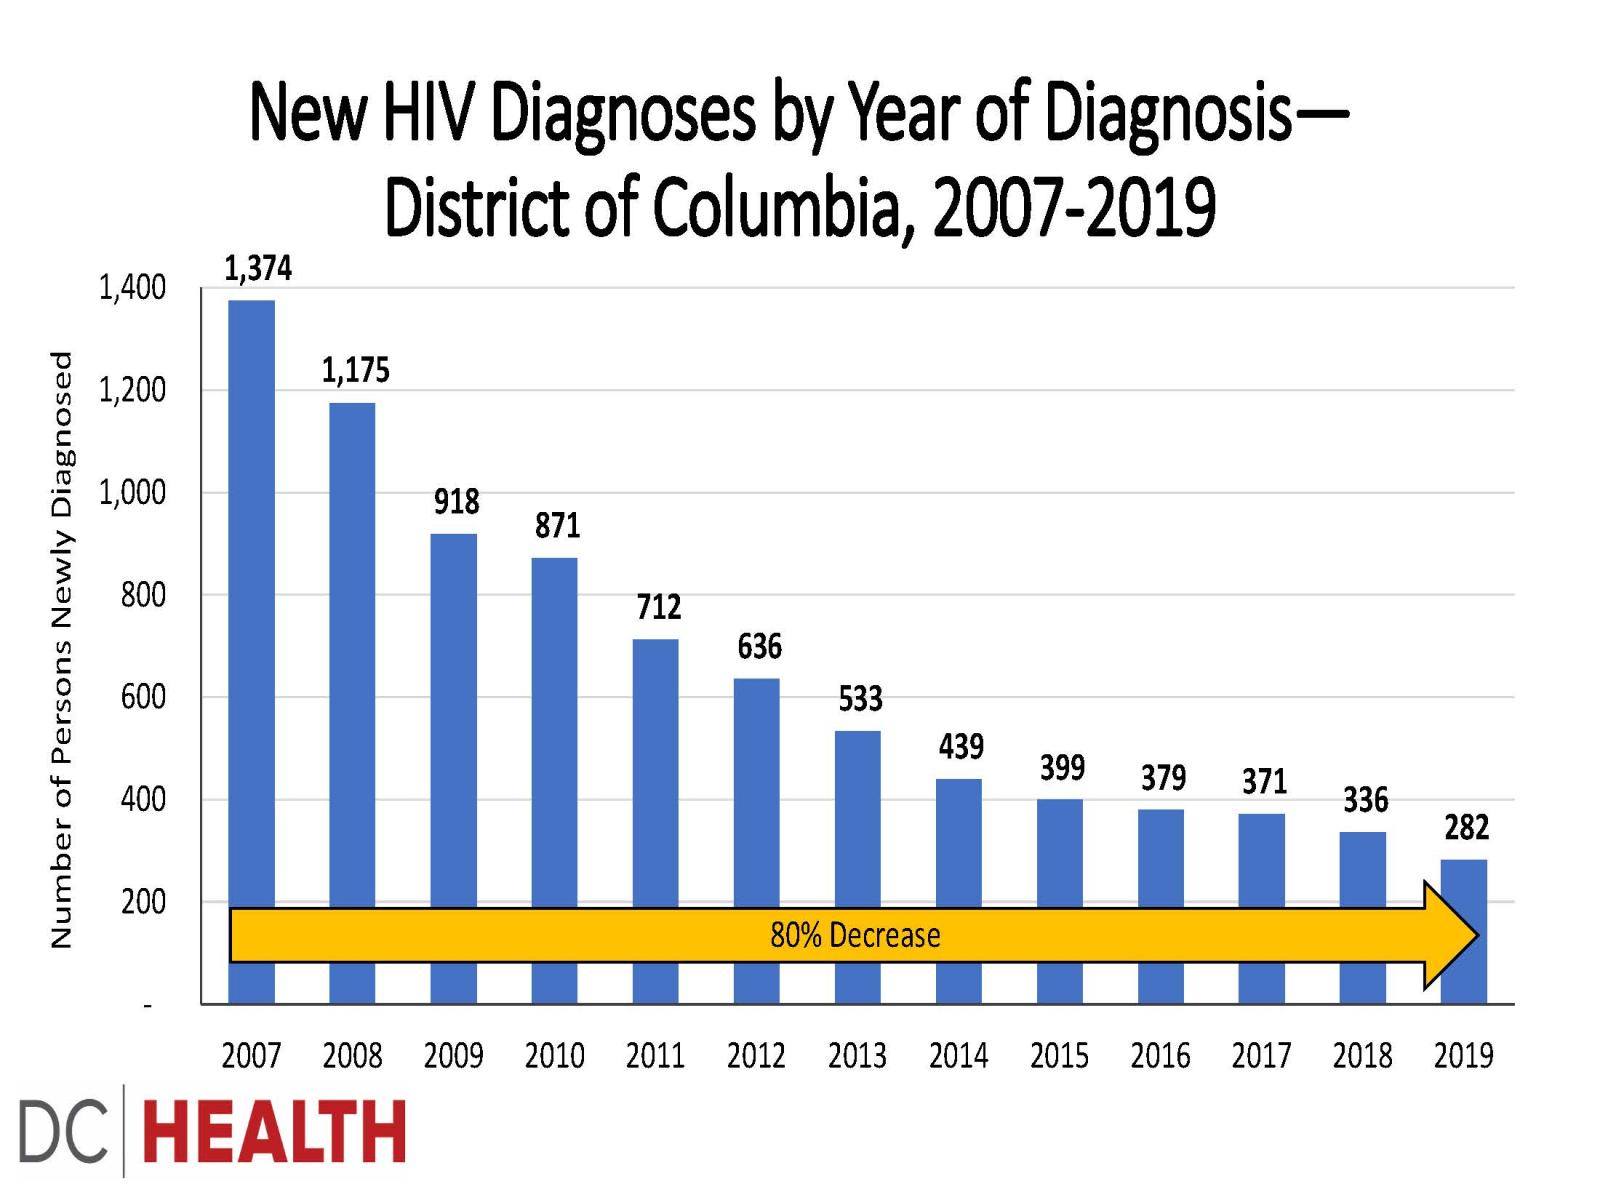 The bar graph shows New HIV Diagnoses in DC from 2007 to 2019 with an 80 percent decrease over time